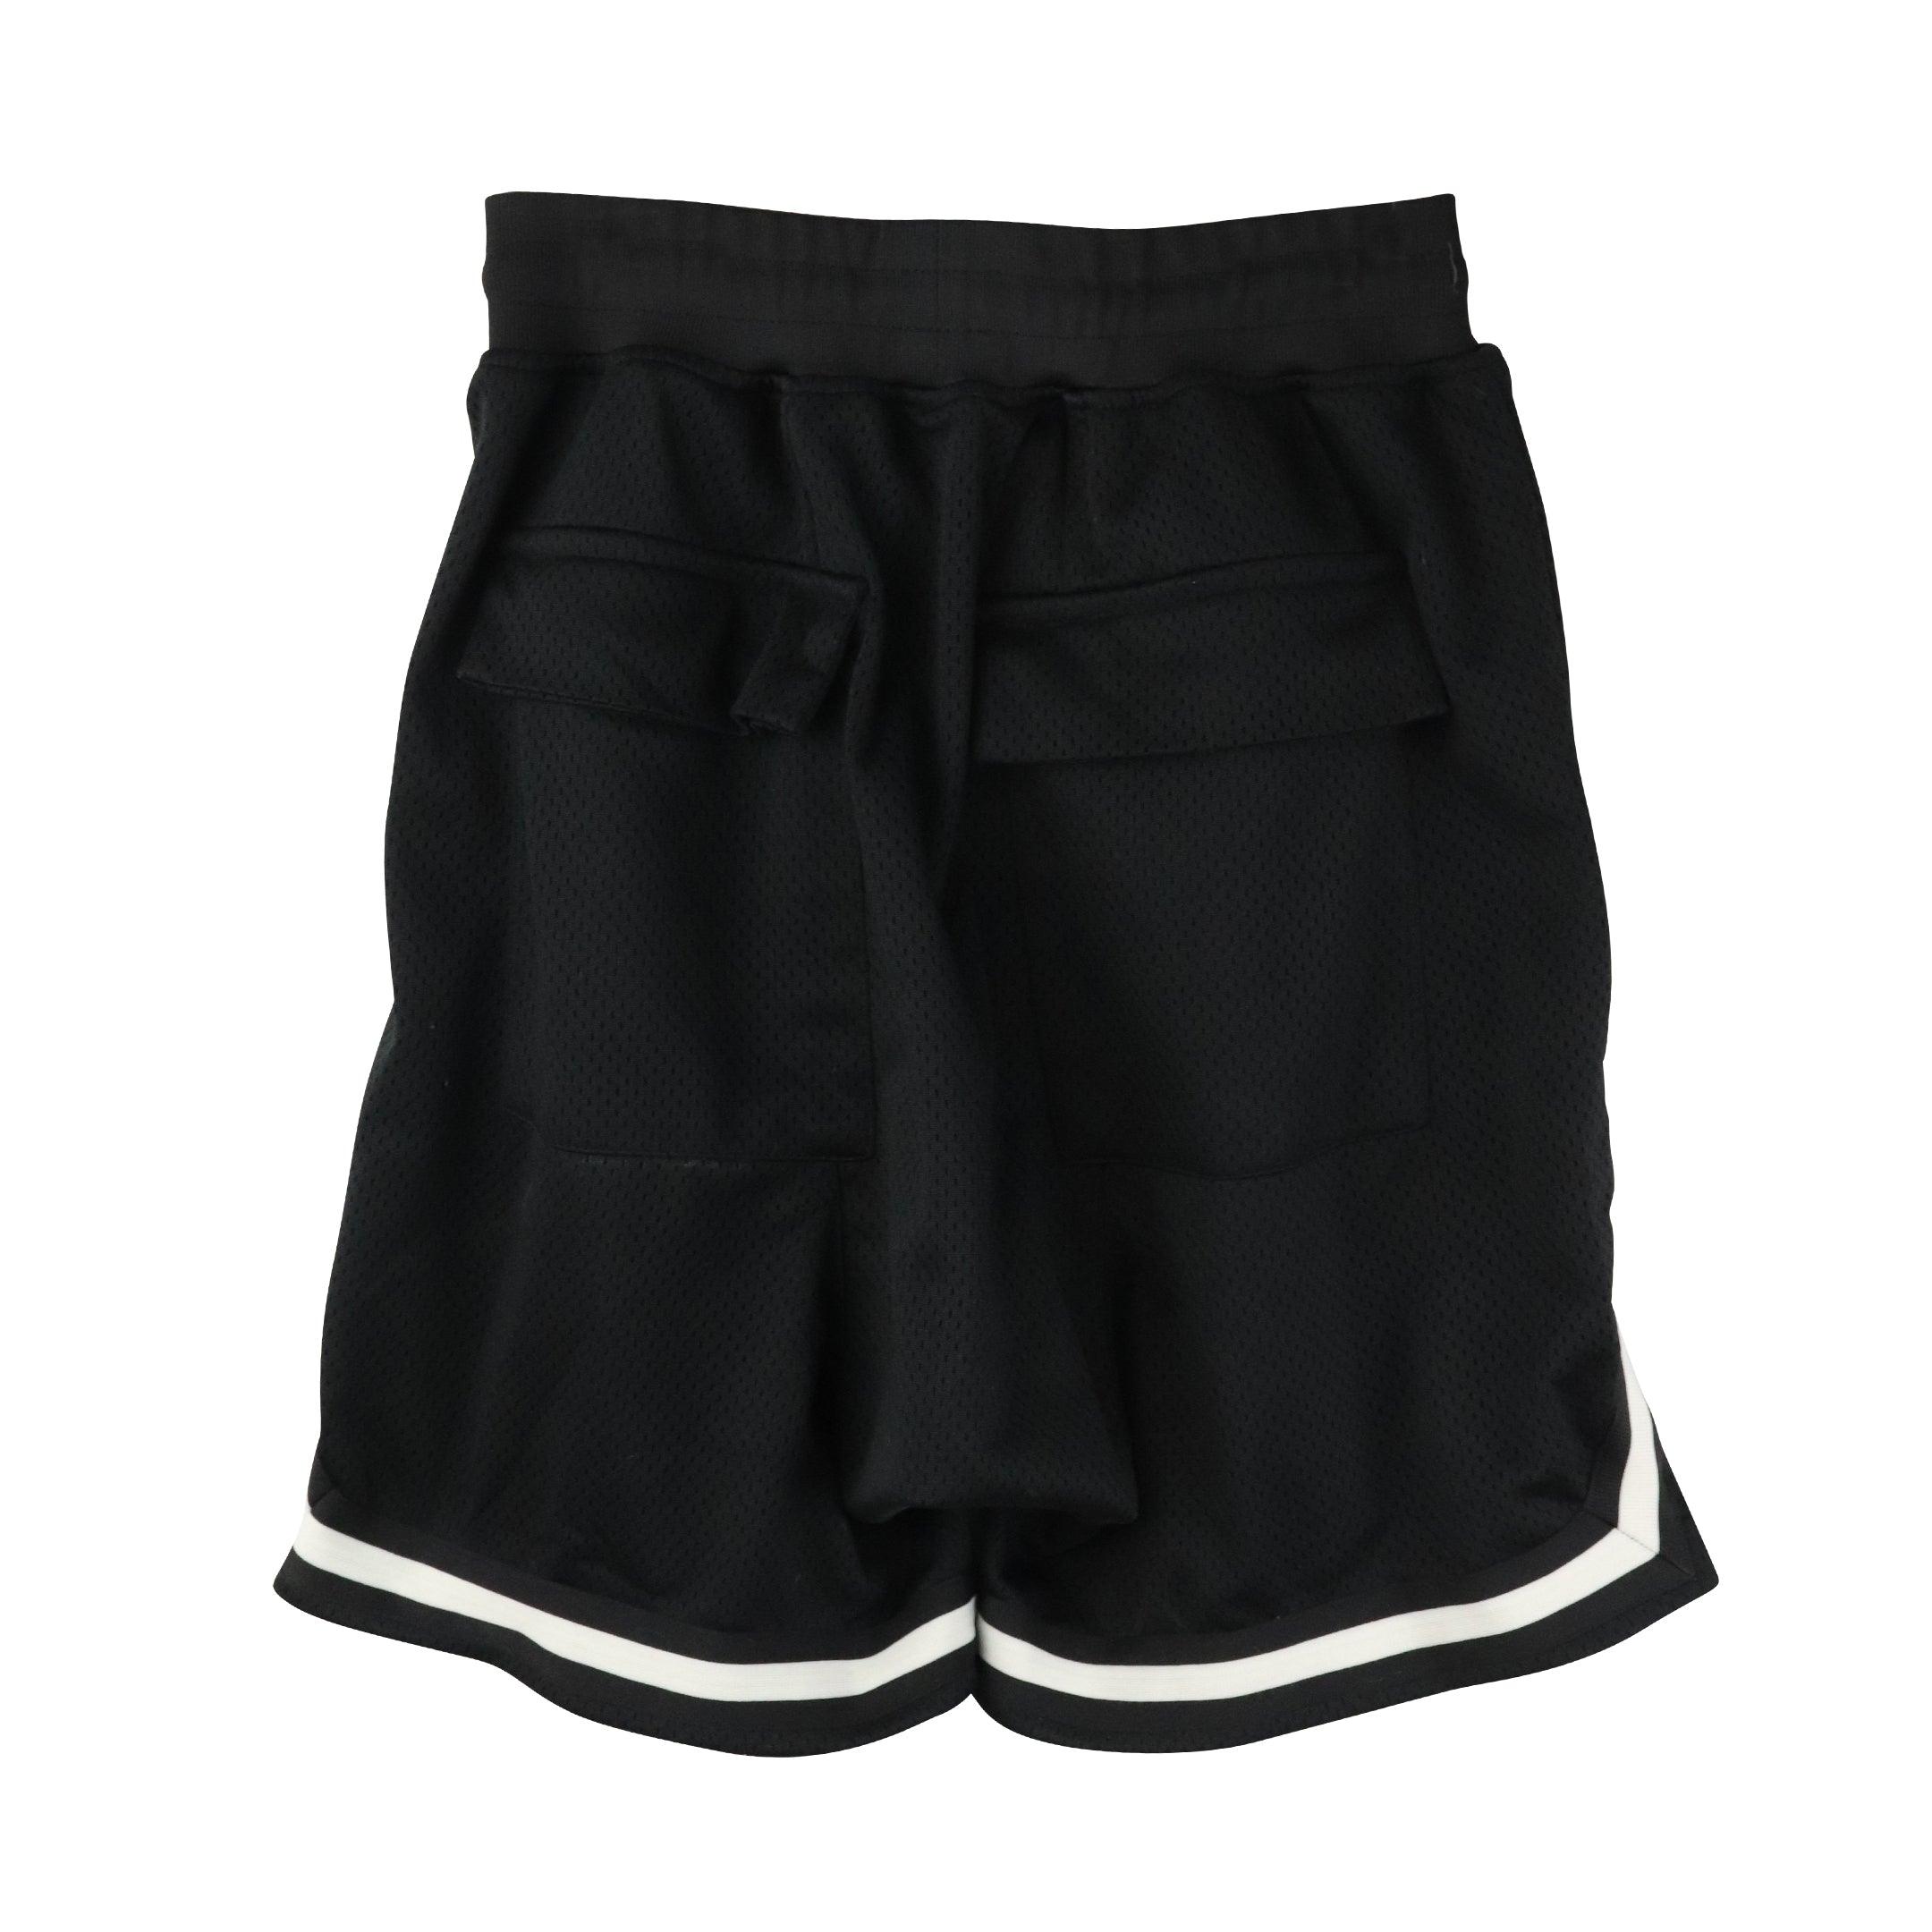 Fear of God Shorts - Men's M - Fashionably Yours